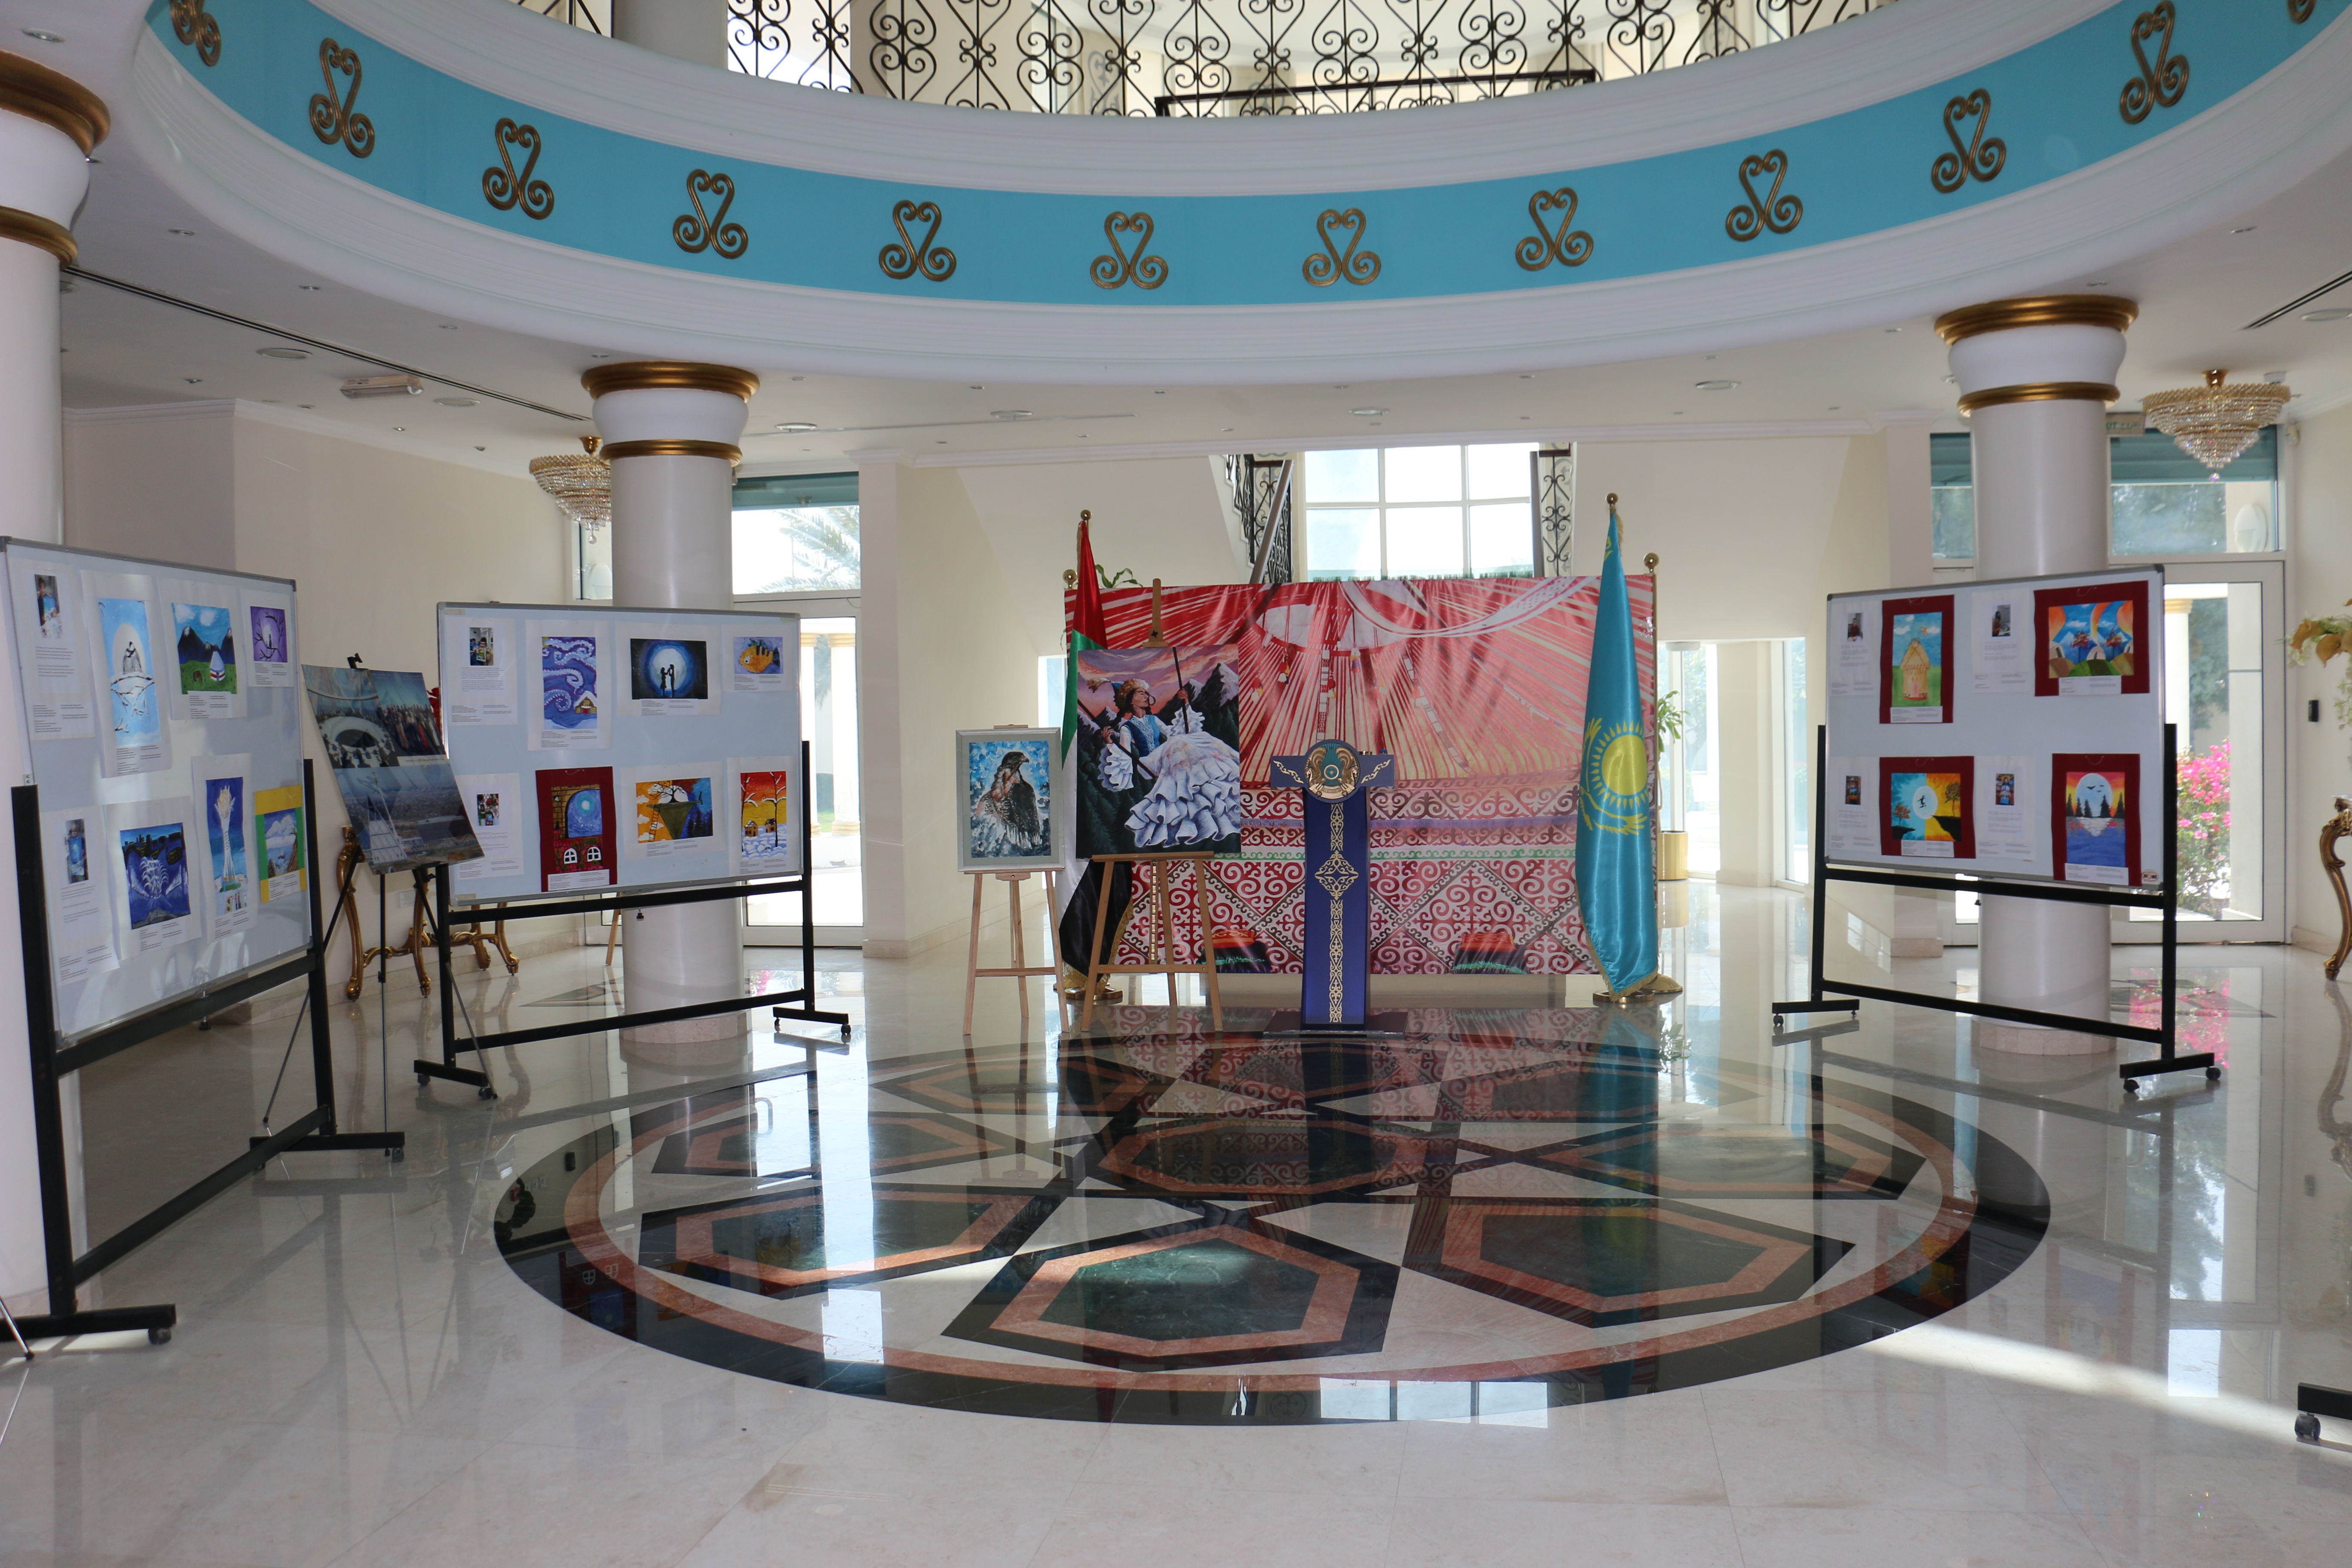 Exhibition of Paintings by Kazakh Youths with Special Educational Needs Opens in UAE